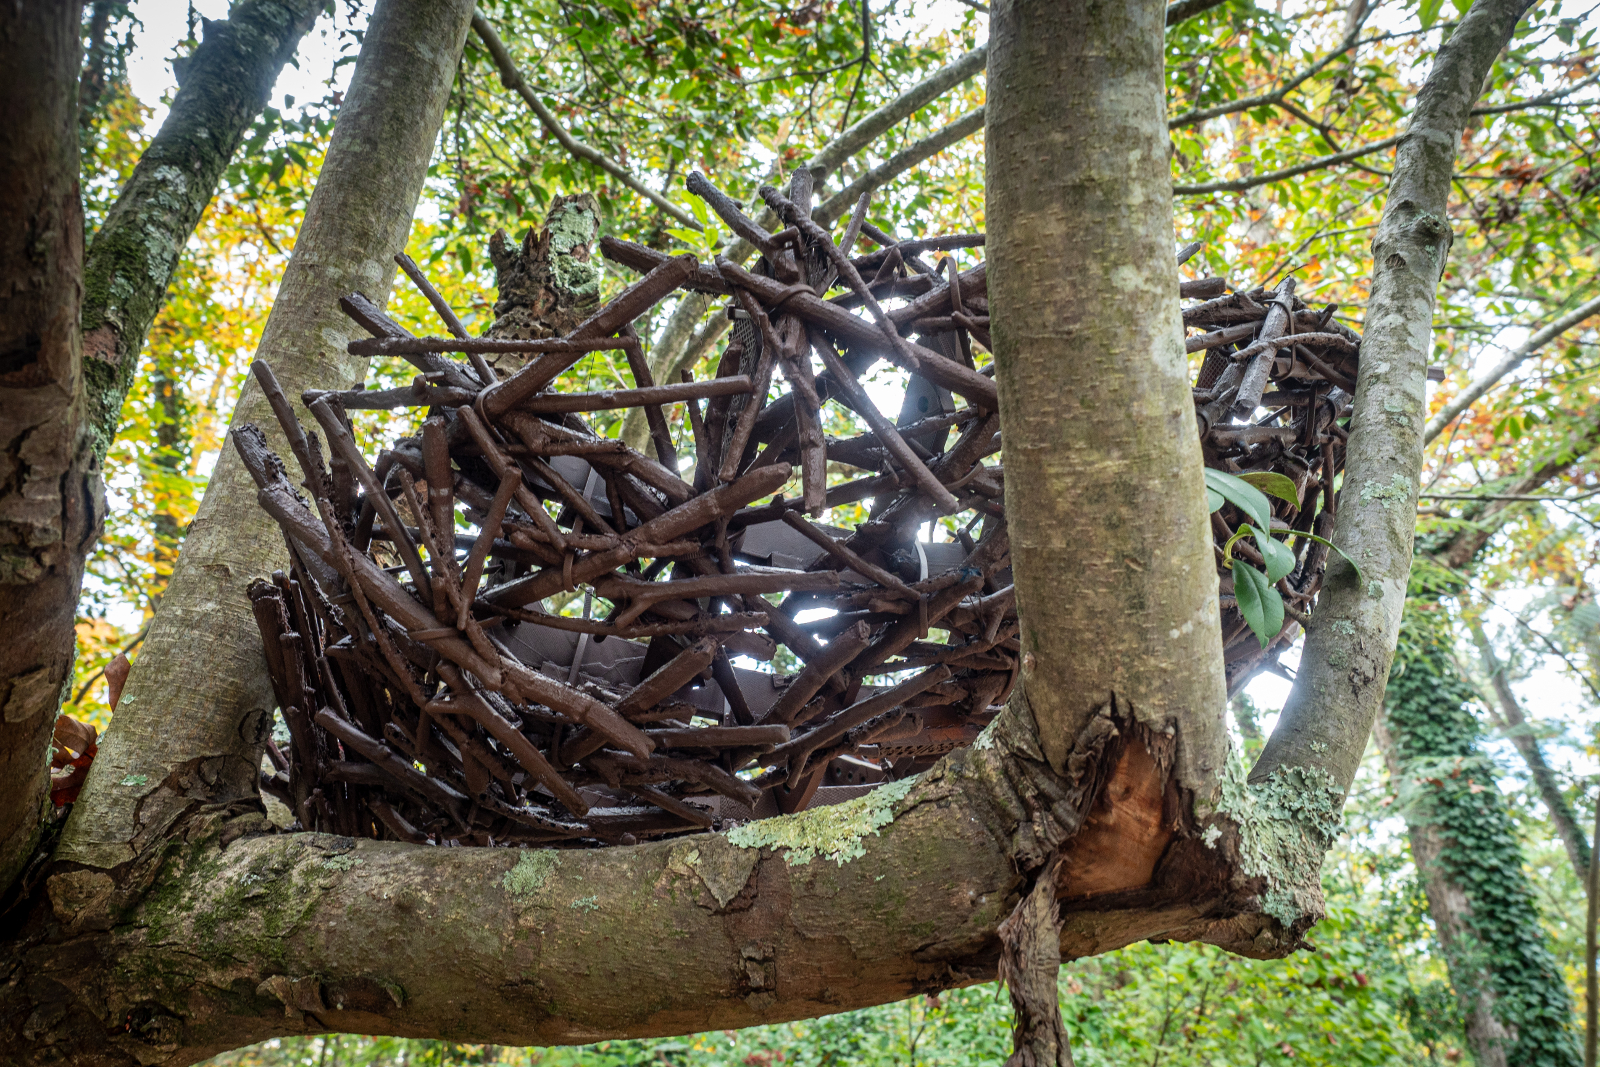 A large, artificial nest sitting in a tree